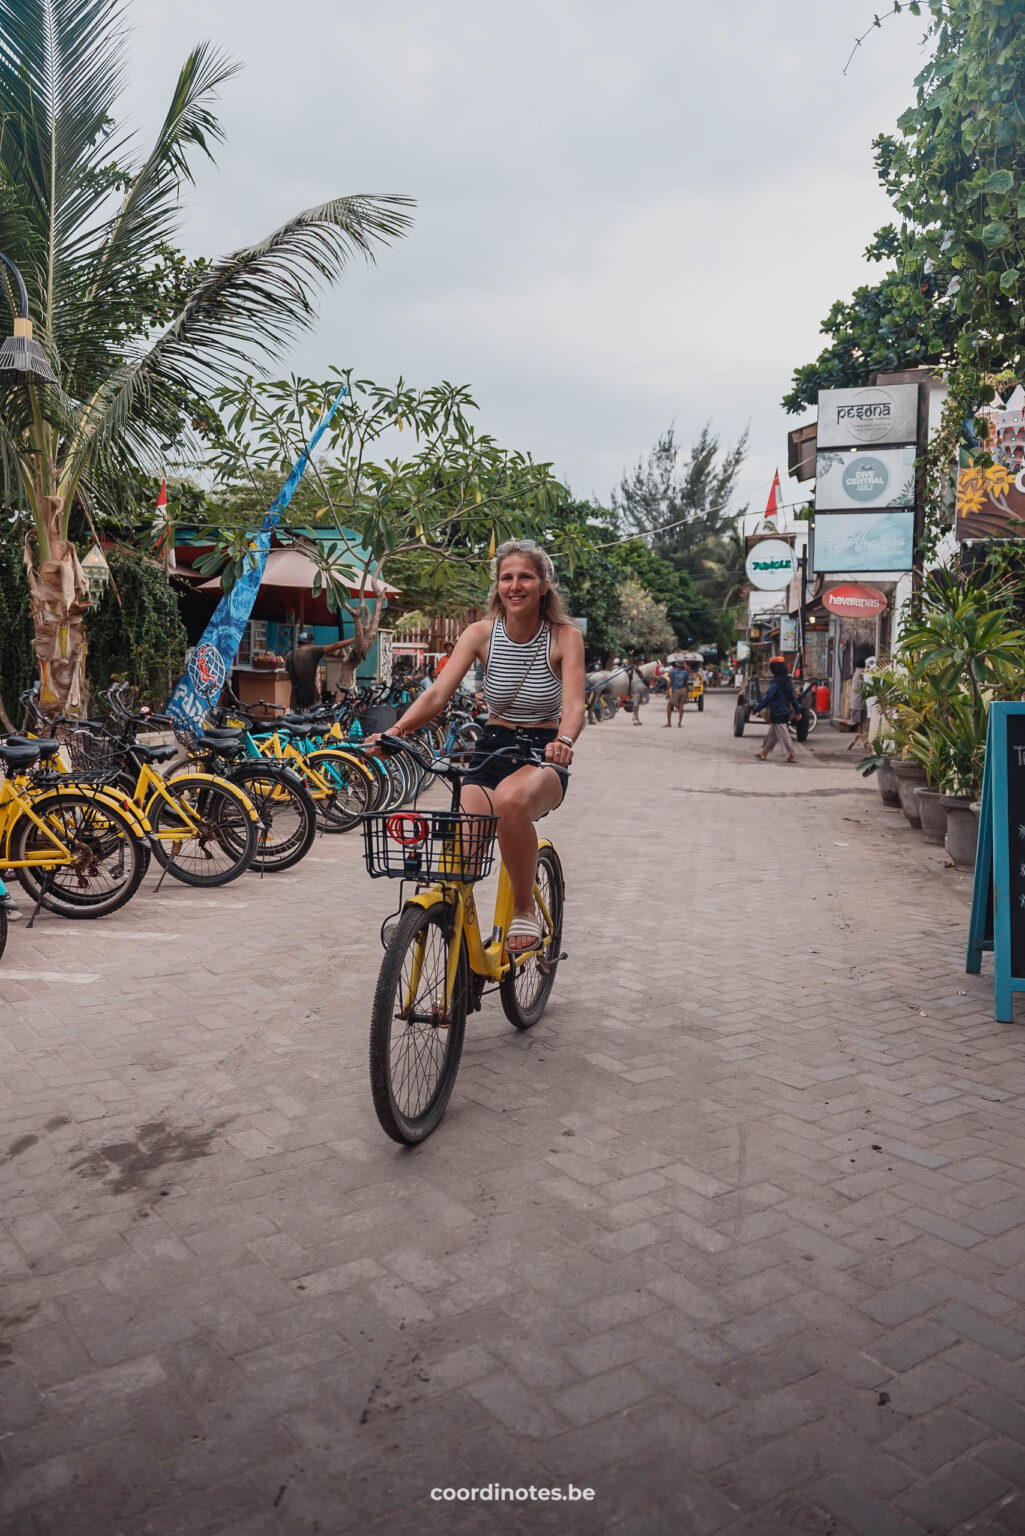 There is no motorized traffic on the Gili islands